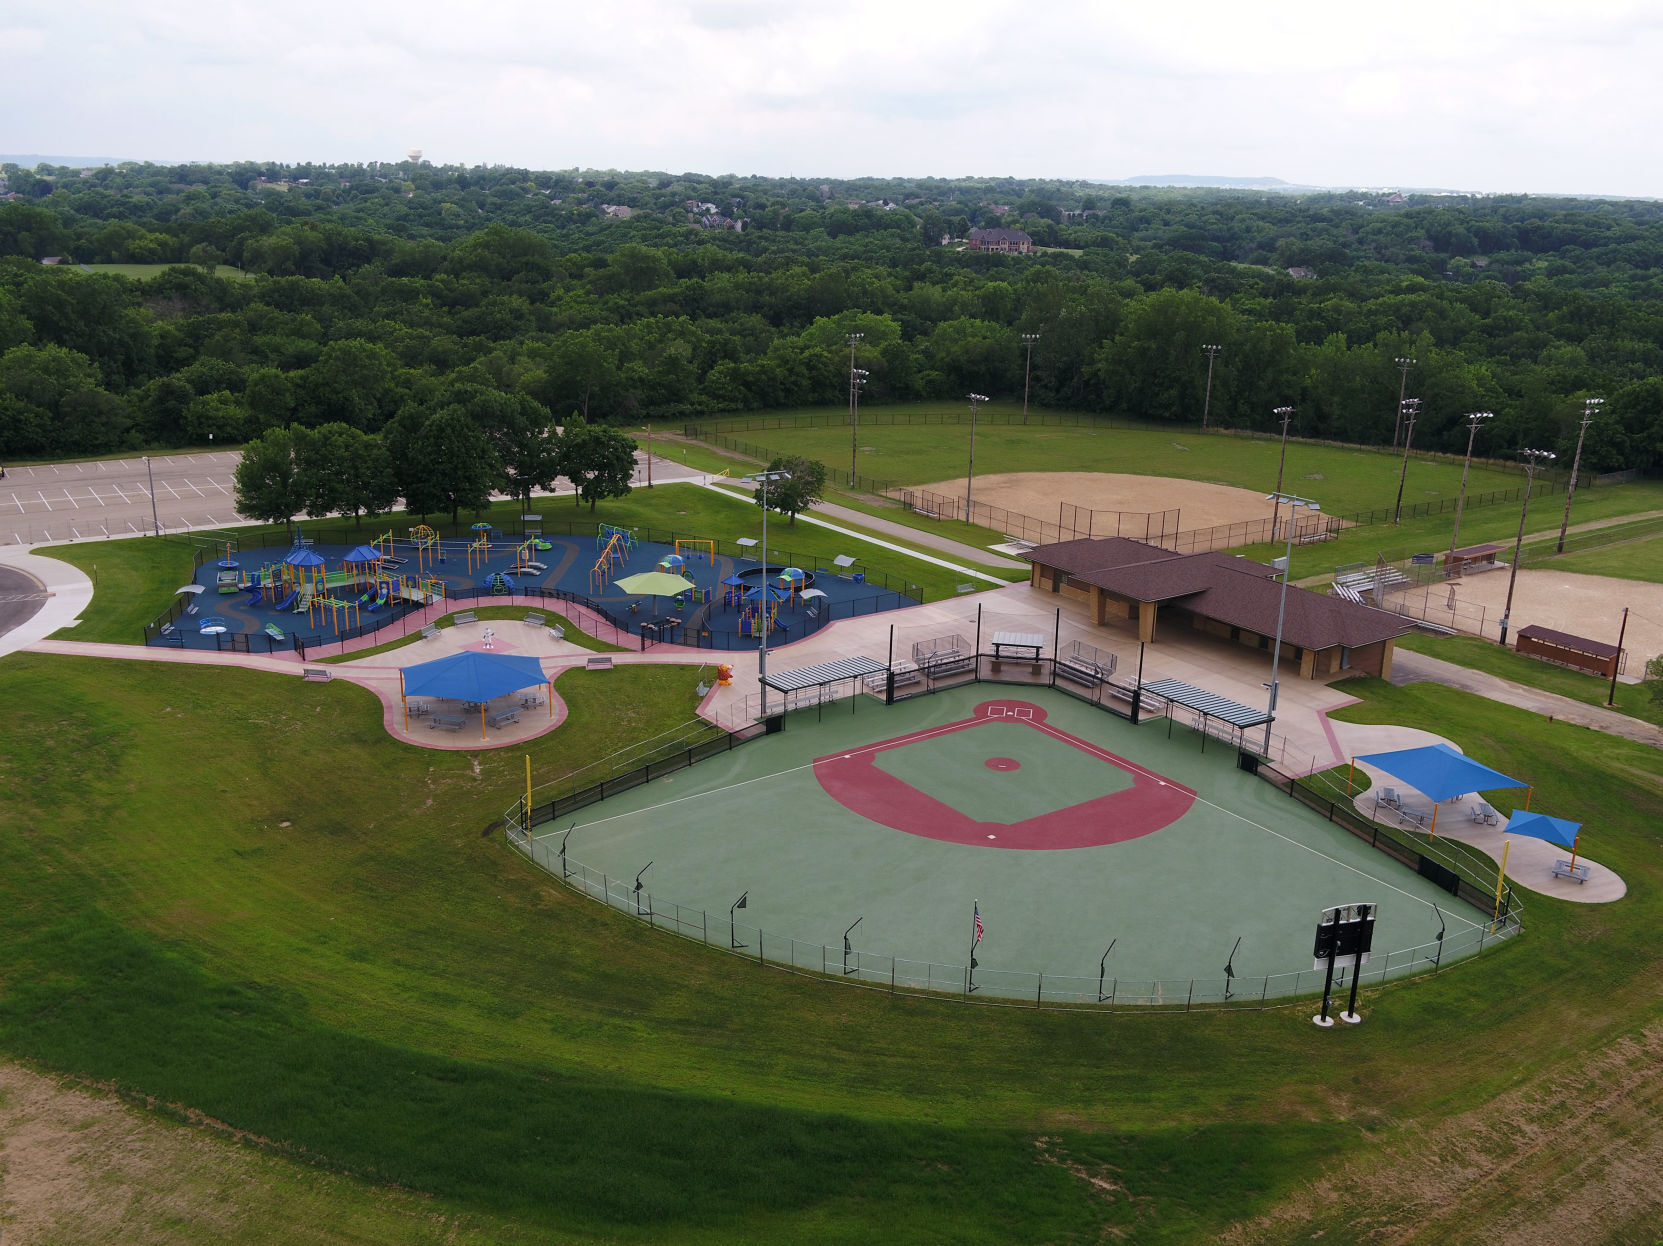 Miracle League of Dubuque complex at Veterans Memorial Park will receive a $5,000 grant from the Dubuque Racing Association. PHOTO CREDIT: Telegraph Herald